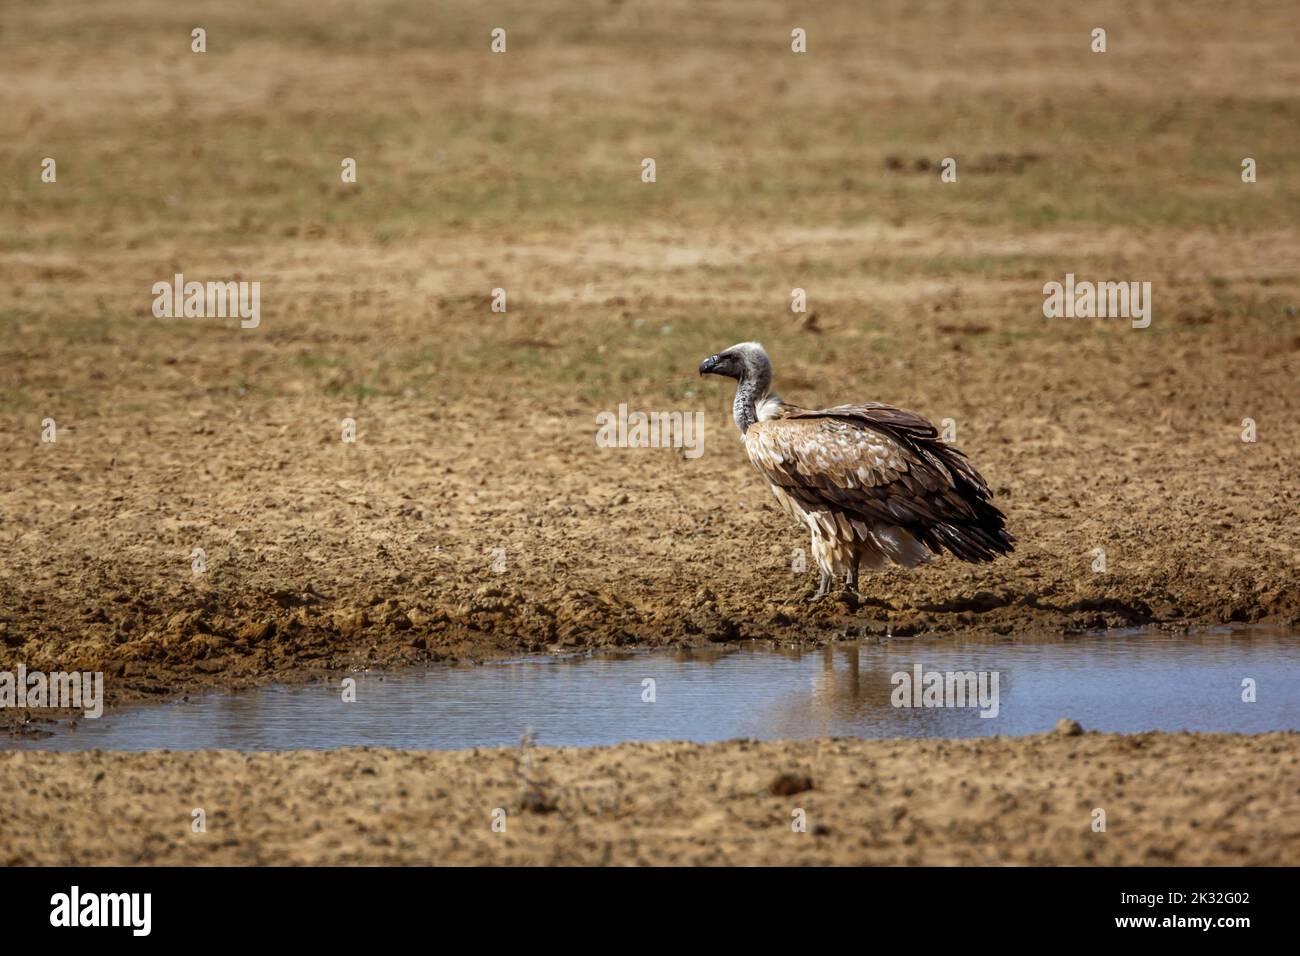 White backed Vulture standing at waterhole in Kgalagadi transfrontier park, South Africa; Specie Gyps africanus family of Accipitridae Stock Photo